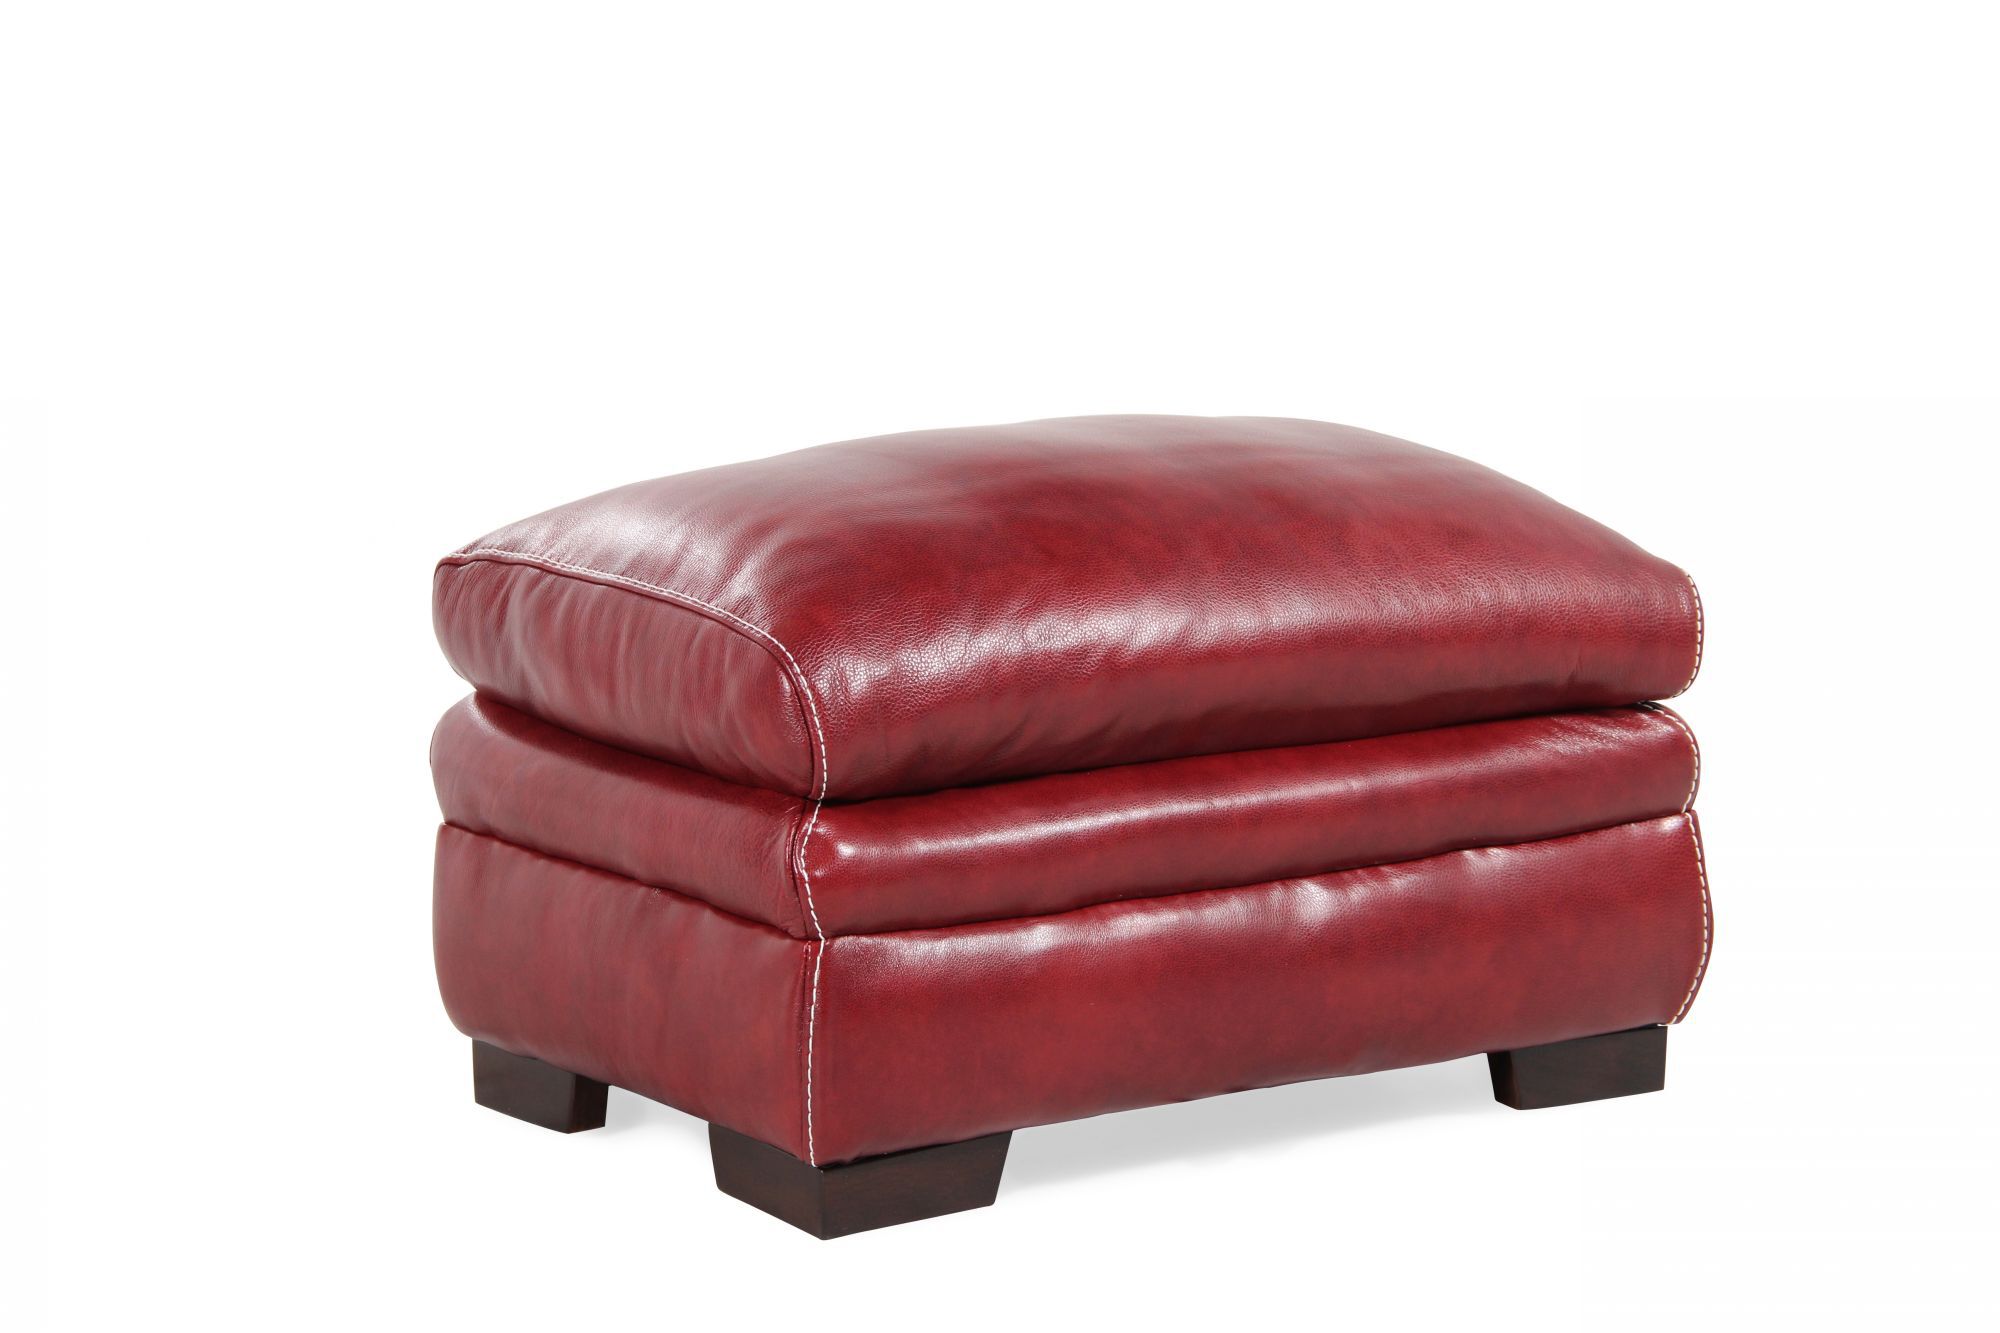 Mathis Brothers Furniture, Red Leather Ottoman